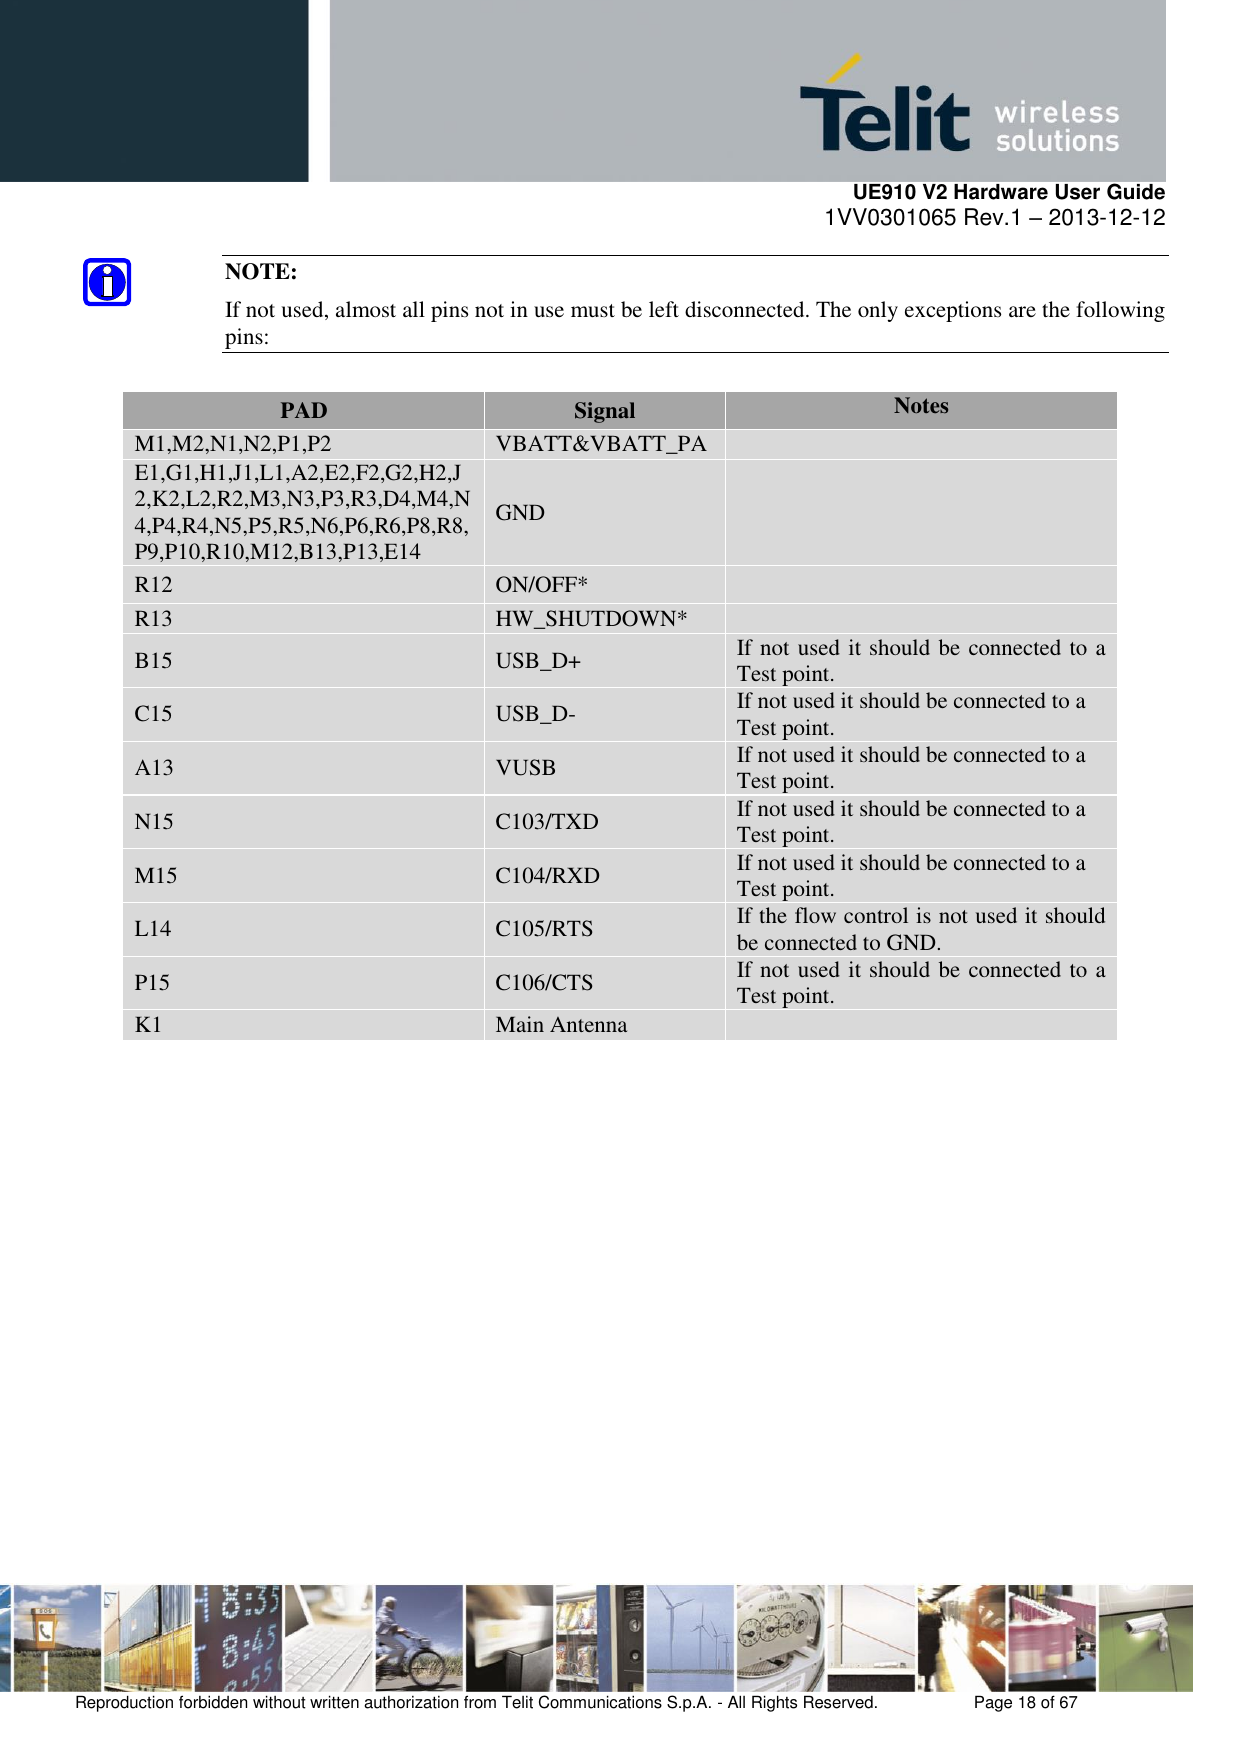     UE910 V2 Hardware User Guide 1VV0301065 Rev.1 – 2013-12-12  Reproduction forbidden without written authorization from Telit Communications S.p.A. - All Rights Reserved.    Page 18 of 67                                                     NOTE: If not used, almost all pins not in use must be left disconnected. The only exceptions are the following pins:  PAD Signal Notes M1,M2,N1,N2,P1,P2 VBATT&amp;VBATT_PA  E1,G1,H1,J1,L1,A2,E2,F2,G2,H2,J2,K2,L2,R2,M3,N3,P3,R3,D4,M4,N4,P4,R4,N5,P5,R5,N6,P6,R6,P8,R8,P9,P10,R10,M12,B13,P13,E14 GND  R12 ON/OFF*  R13 HW_SHUTDOWN*  B15 USB_D+ If not used it should be connected to a Test point. C15 USB_D- If not used it should be connected to a Test point. A13 VUSB If not used it should be connected to a Test point. N15 C103/TXD If not used it should be connected to a Test point. M15 C104/RXD If not used it should be connected to a Test point. L14 C105/RTS If the flow control is not used it should be connected to GND. P15 C106/CTS If not used it should be connected to a Test point. K1 Main Antenna          